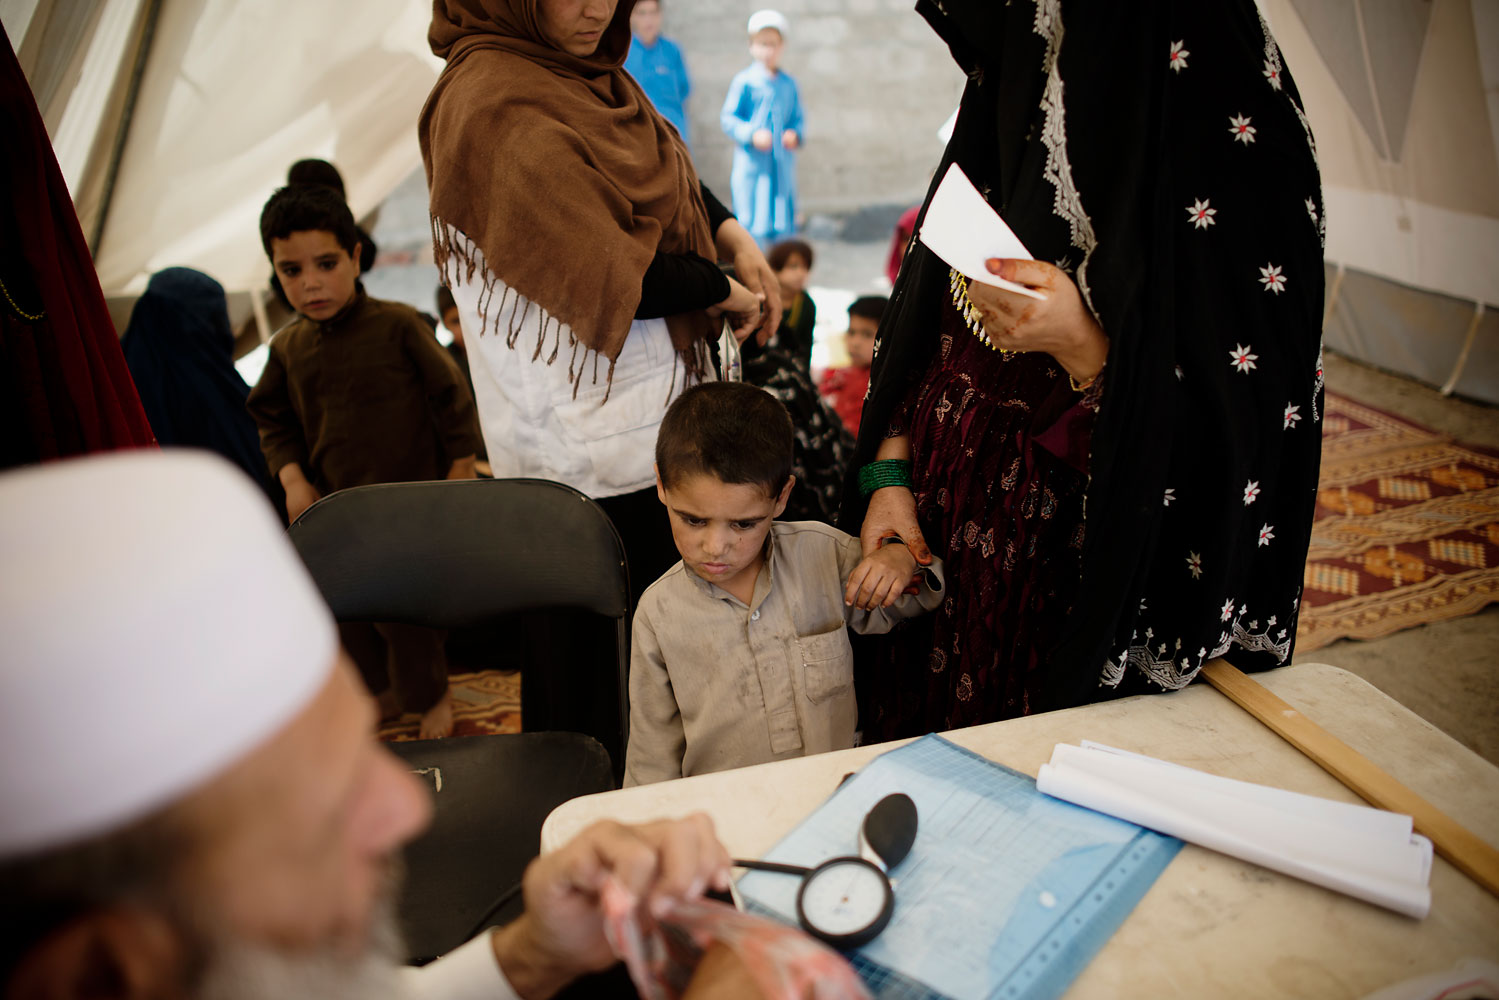 Children come for vaccinations and other care at the MSF mobile clinic in the village of Spina Poza just east of Kabul.